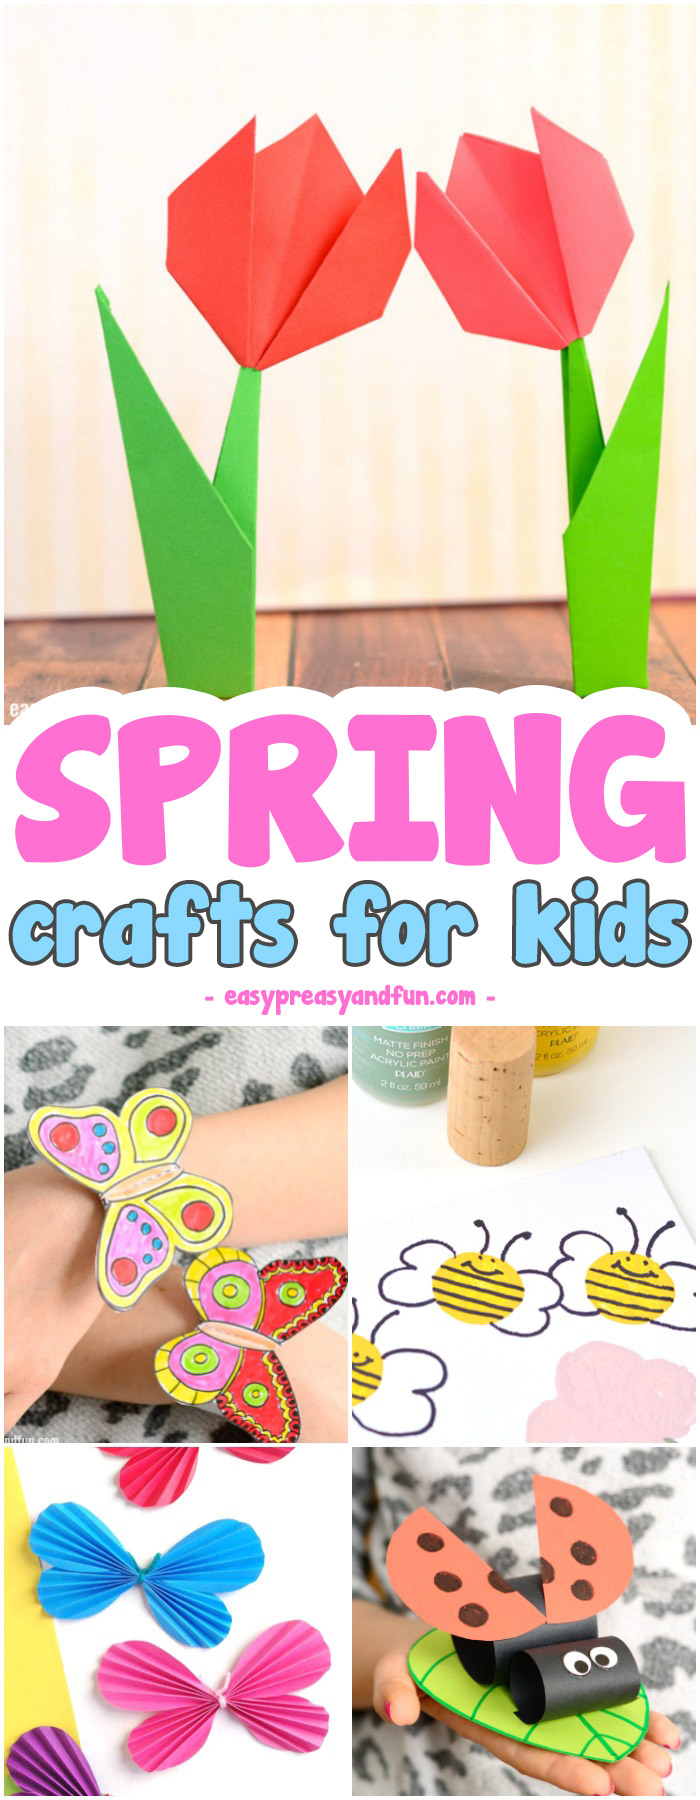 Super fun Spring Crafts for Kids. Fun craft ideas and crafts with printable templates. #craftsforkids #activitiesforkids #springcraftsforkids 